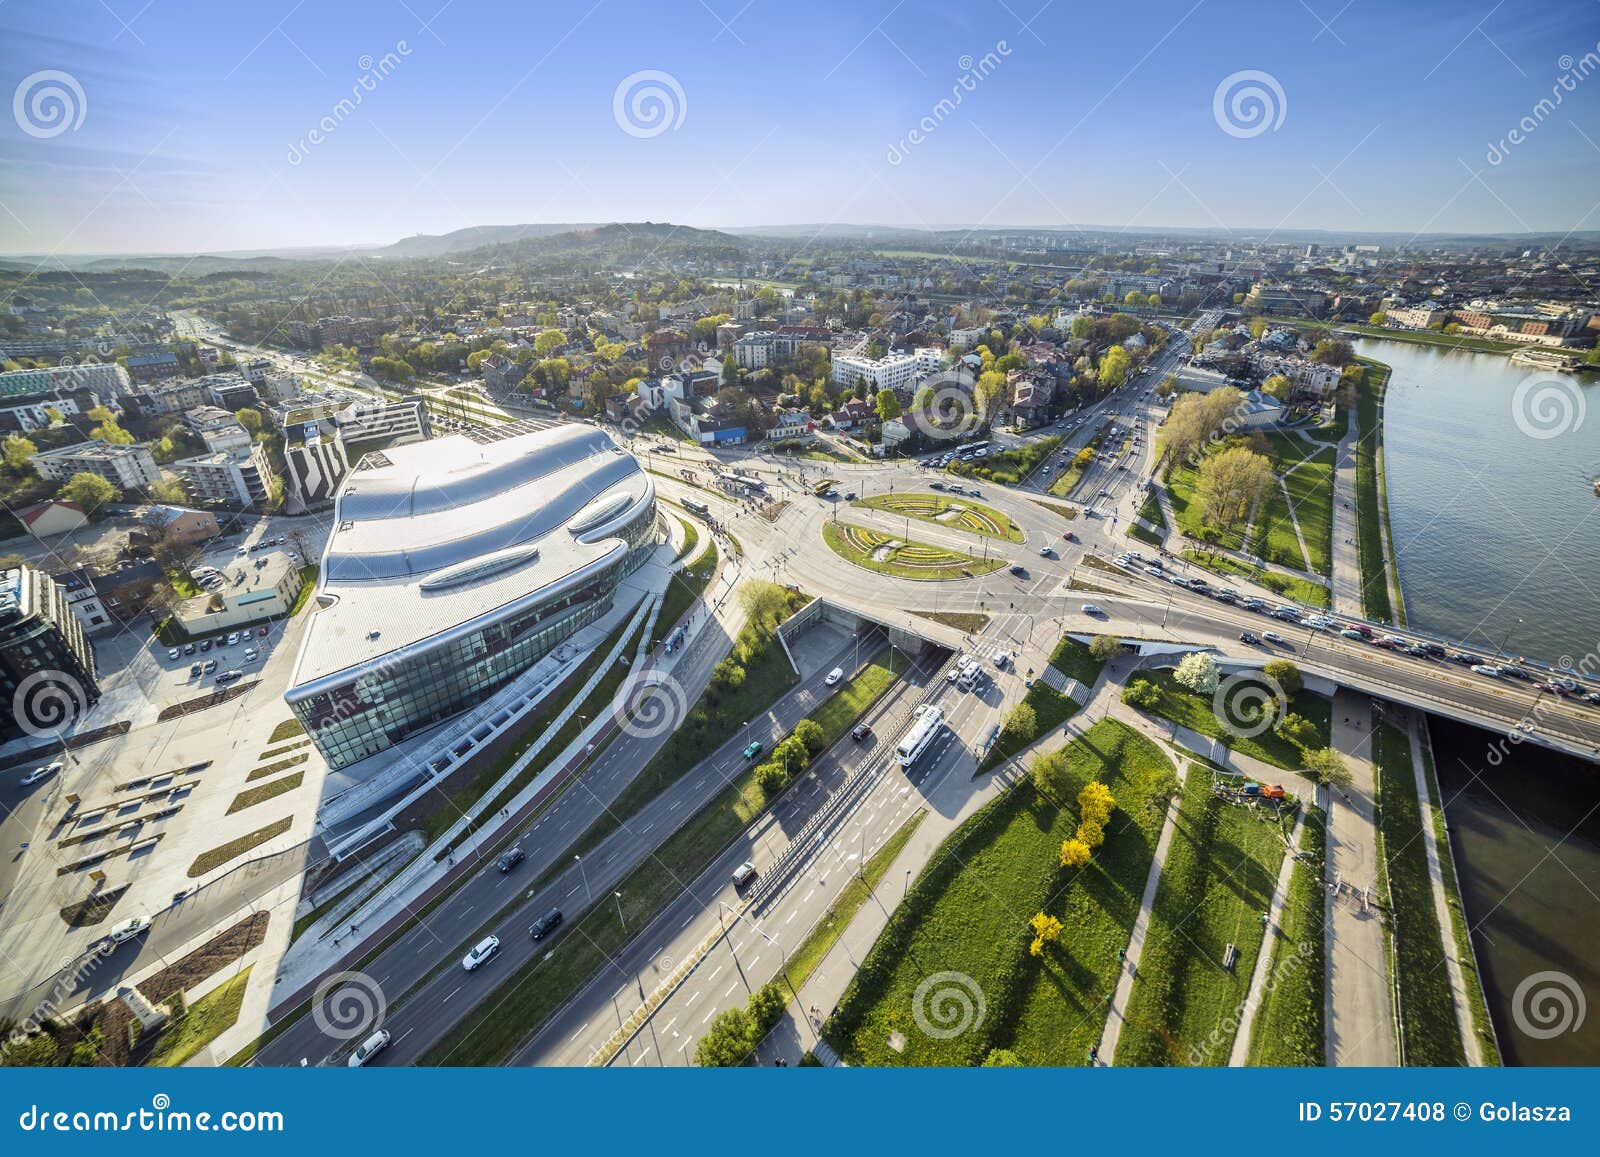 panorama from above of modern part of krakow